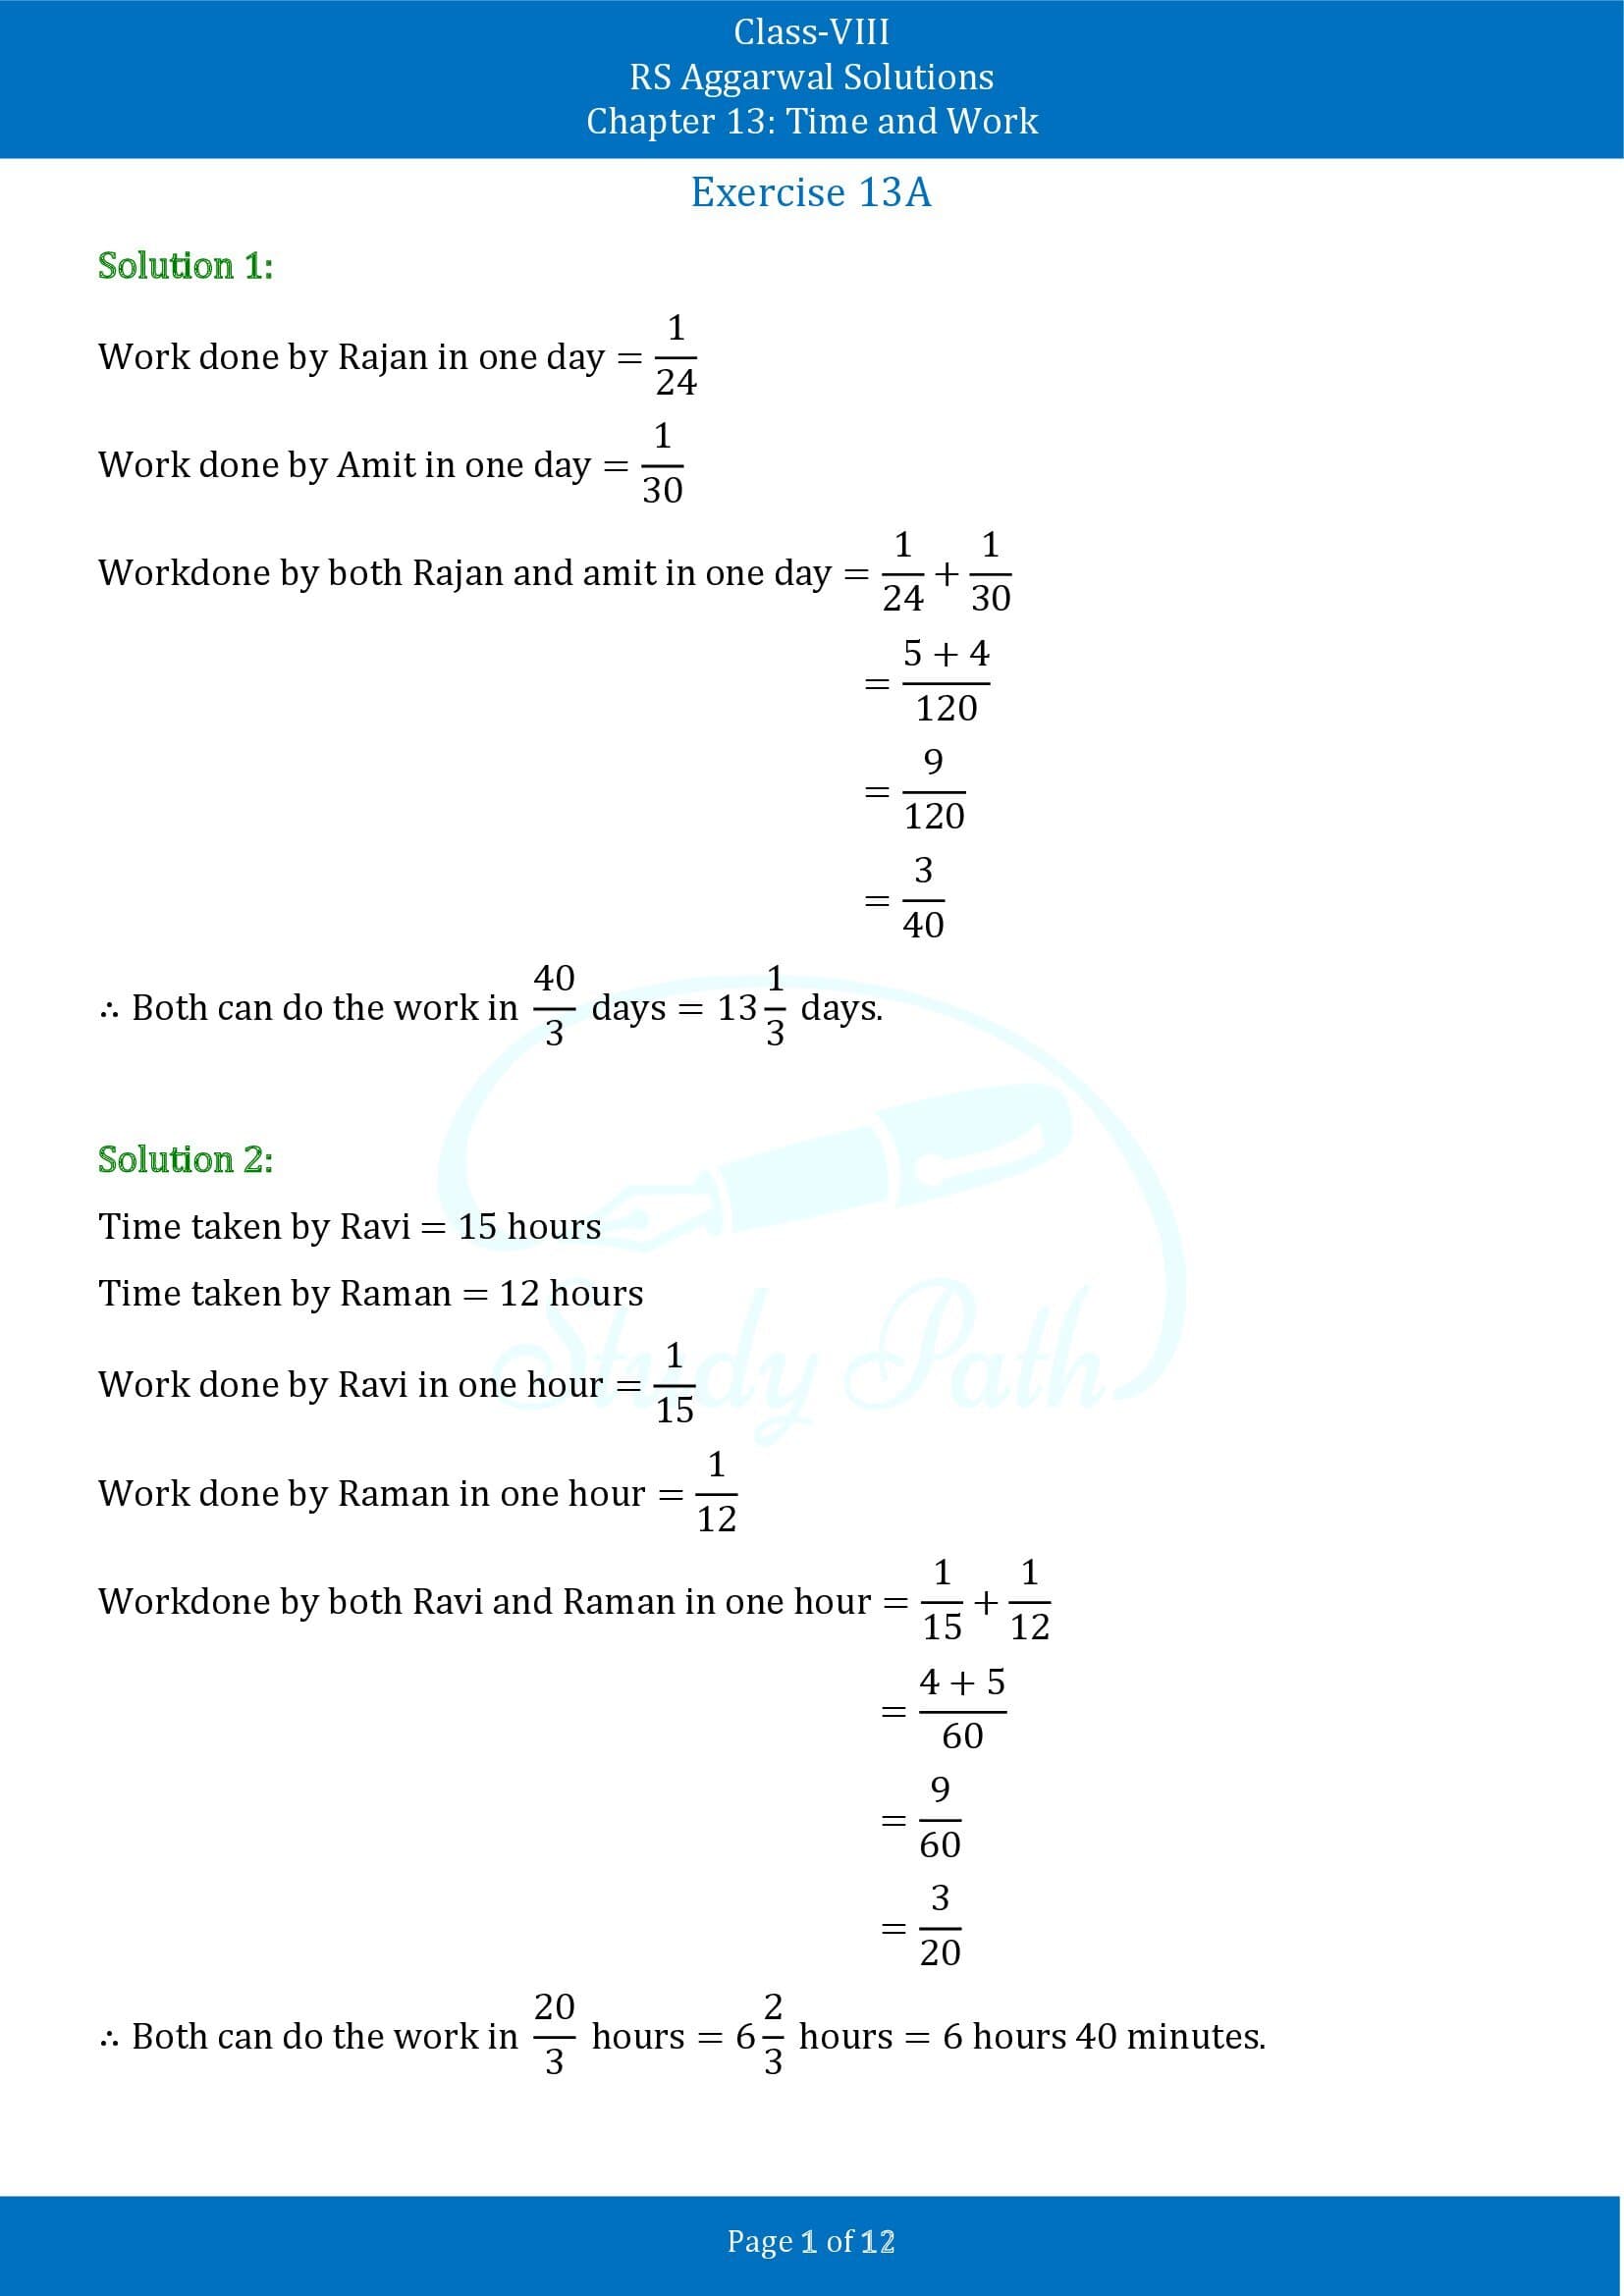 RS Aggarwal Solutions Class 8 Chapter 13 Time and Work Exercise 13A 00001